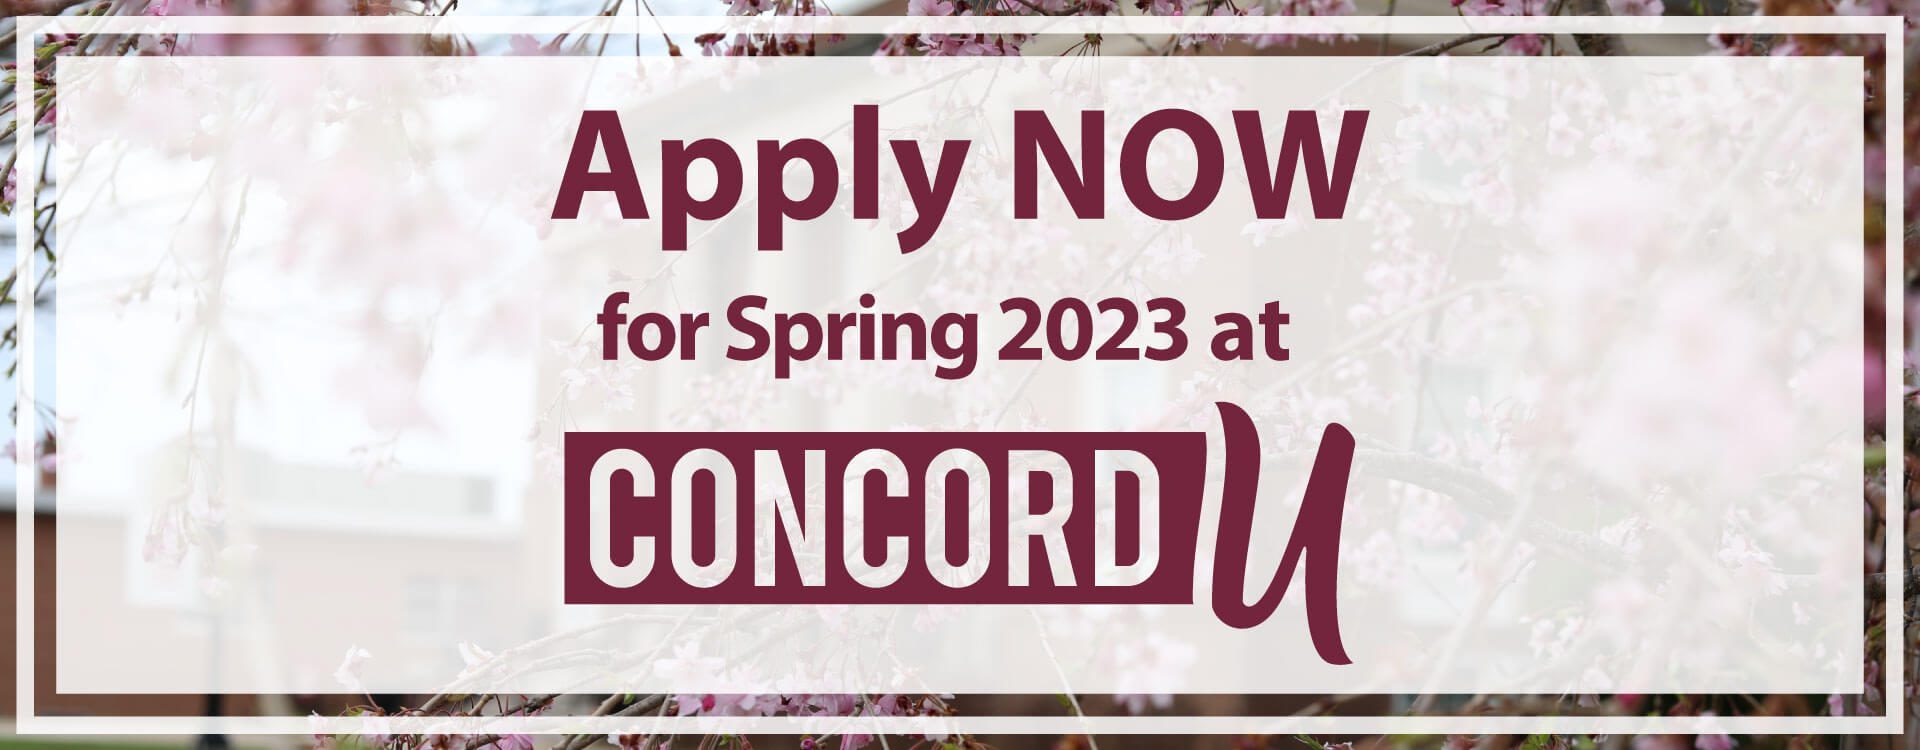 Apply now for Spring 2023 at Concord University!